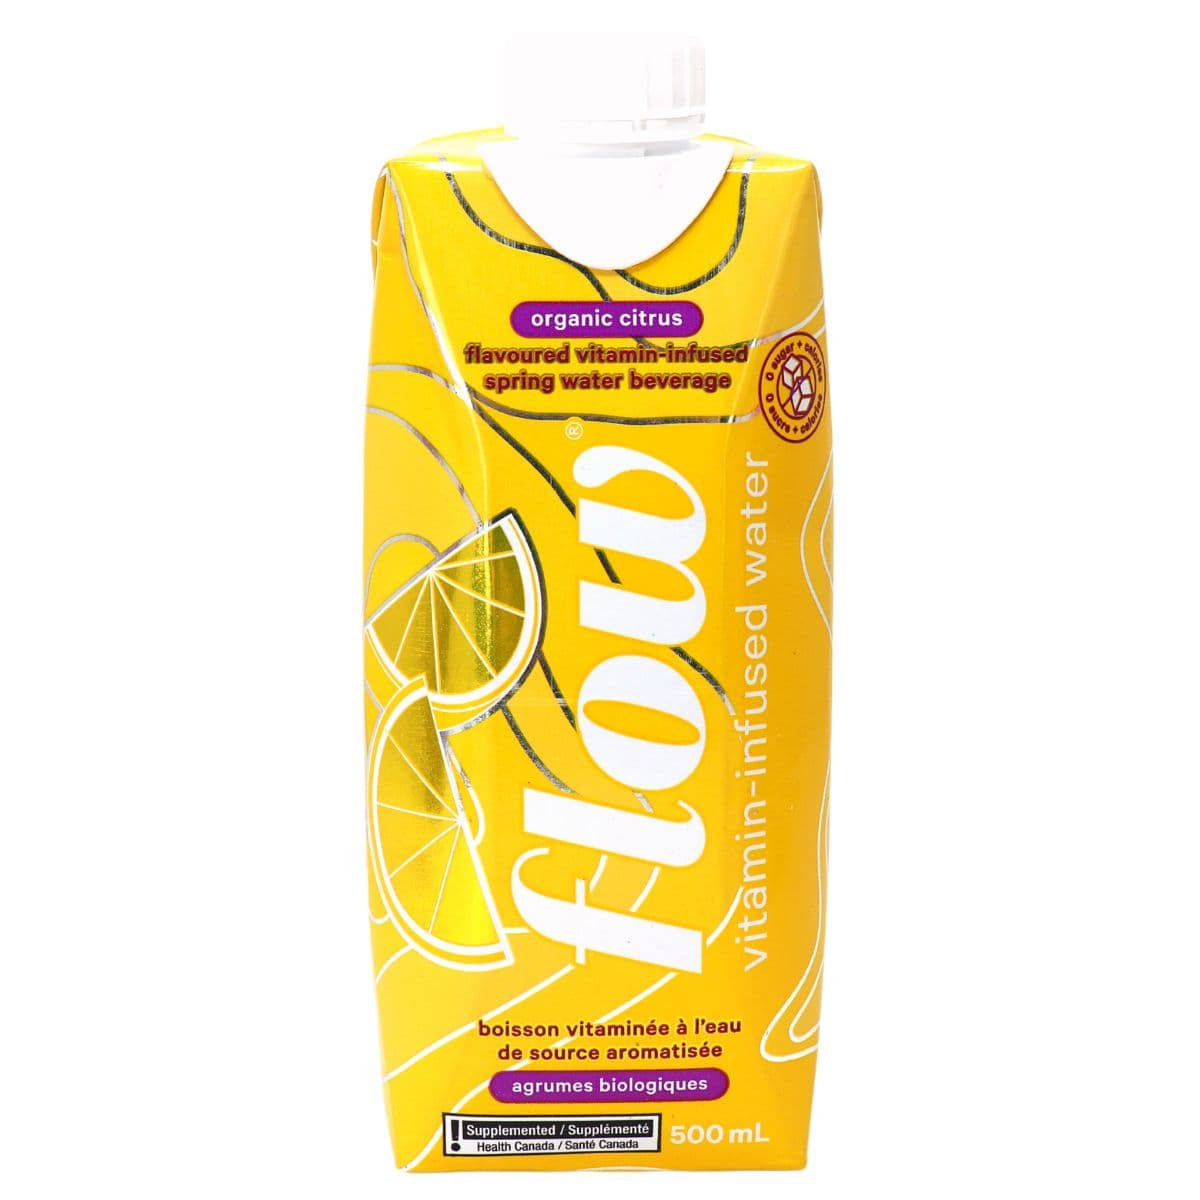 500 mL yellow tetra pack carton of Flow Infused Water - Citrus